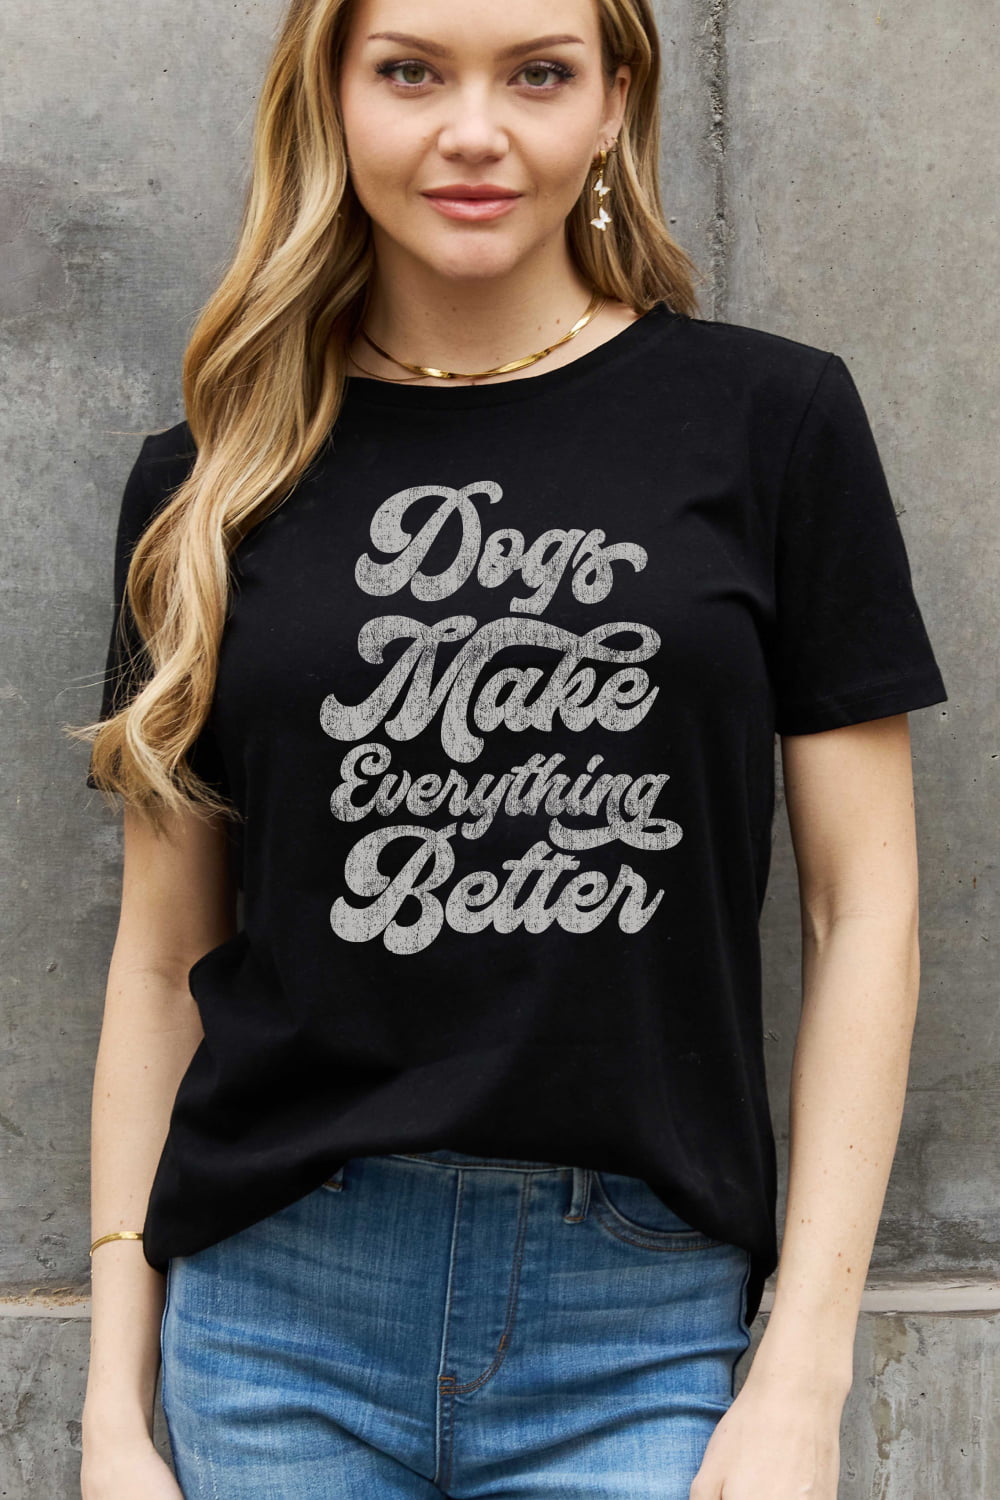 Simply Love Full Size DOGS MAKE EVERTHING BETTER Graphic Cotton Tee